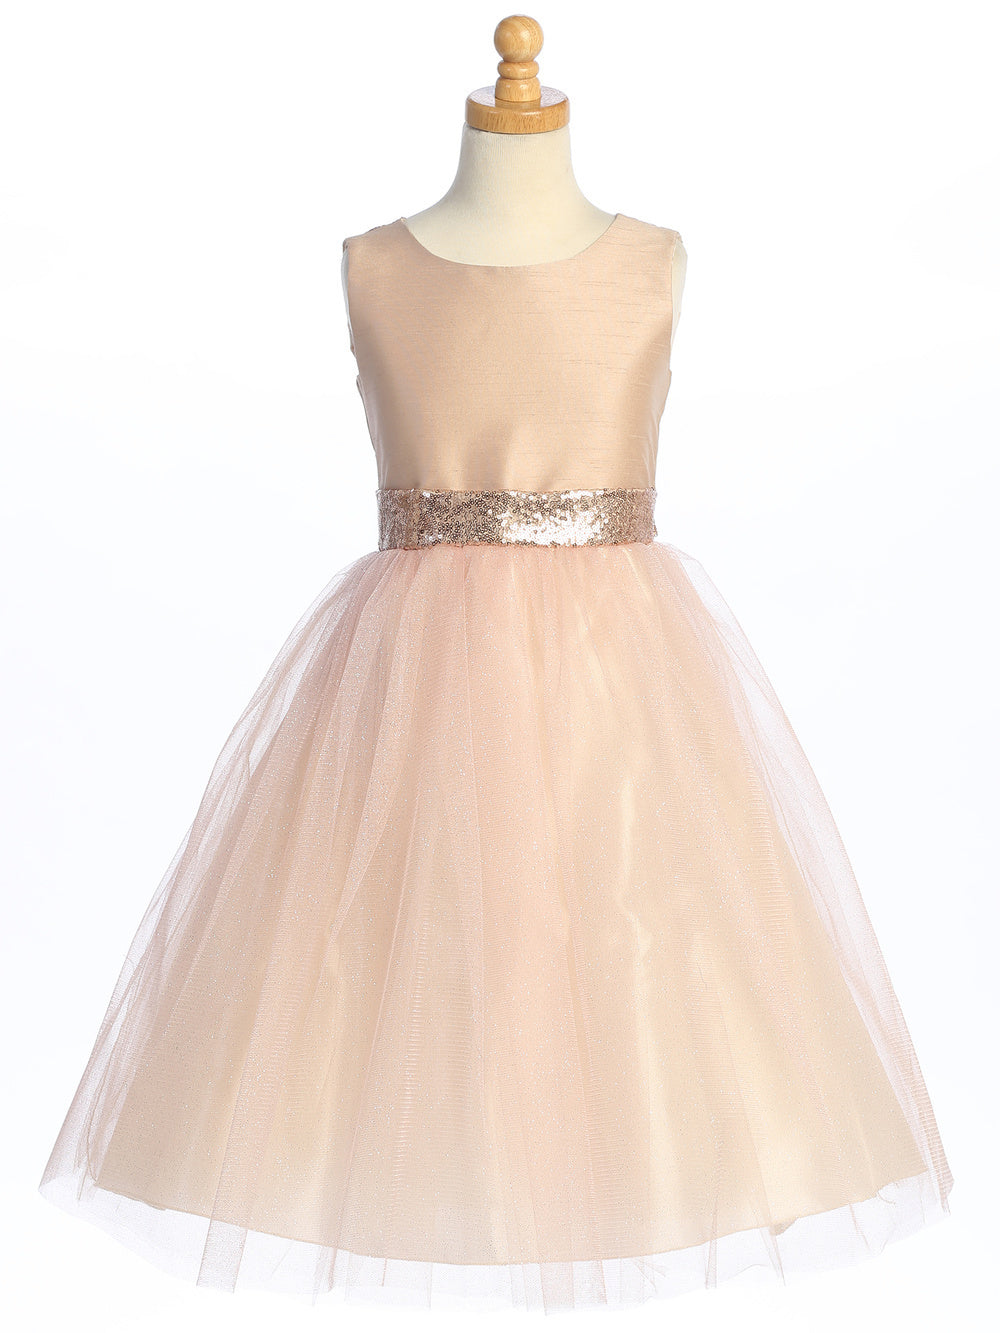 Flower girl captivates in a sequined blush shantung dress with sparkling tulle.